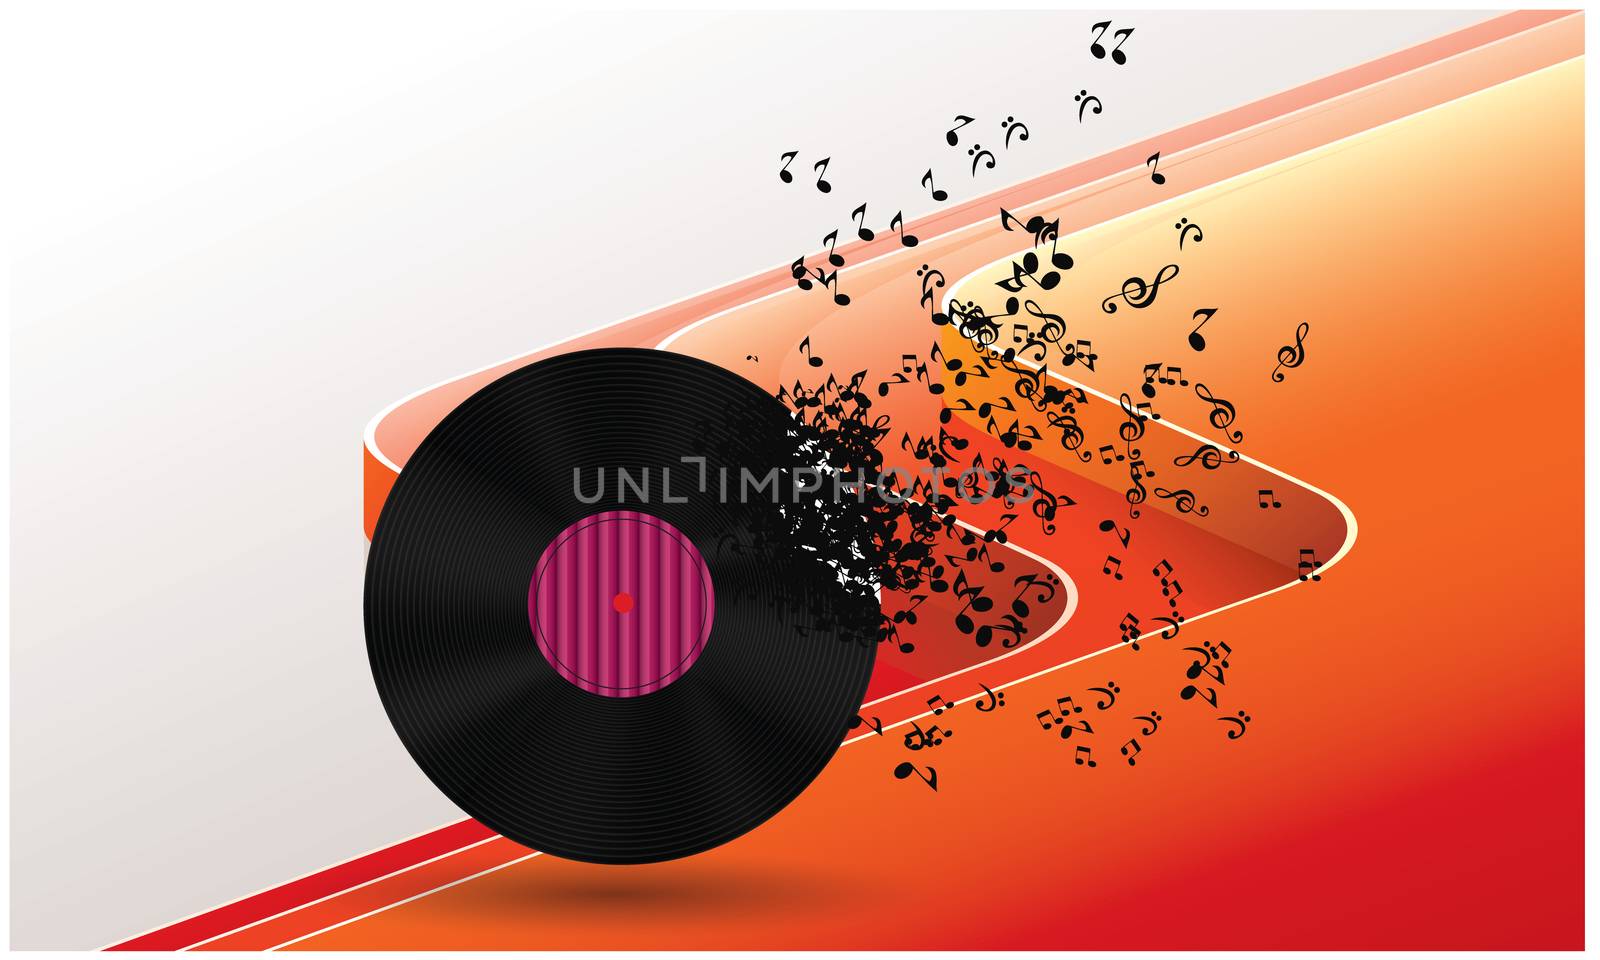 music components are on abstract background